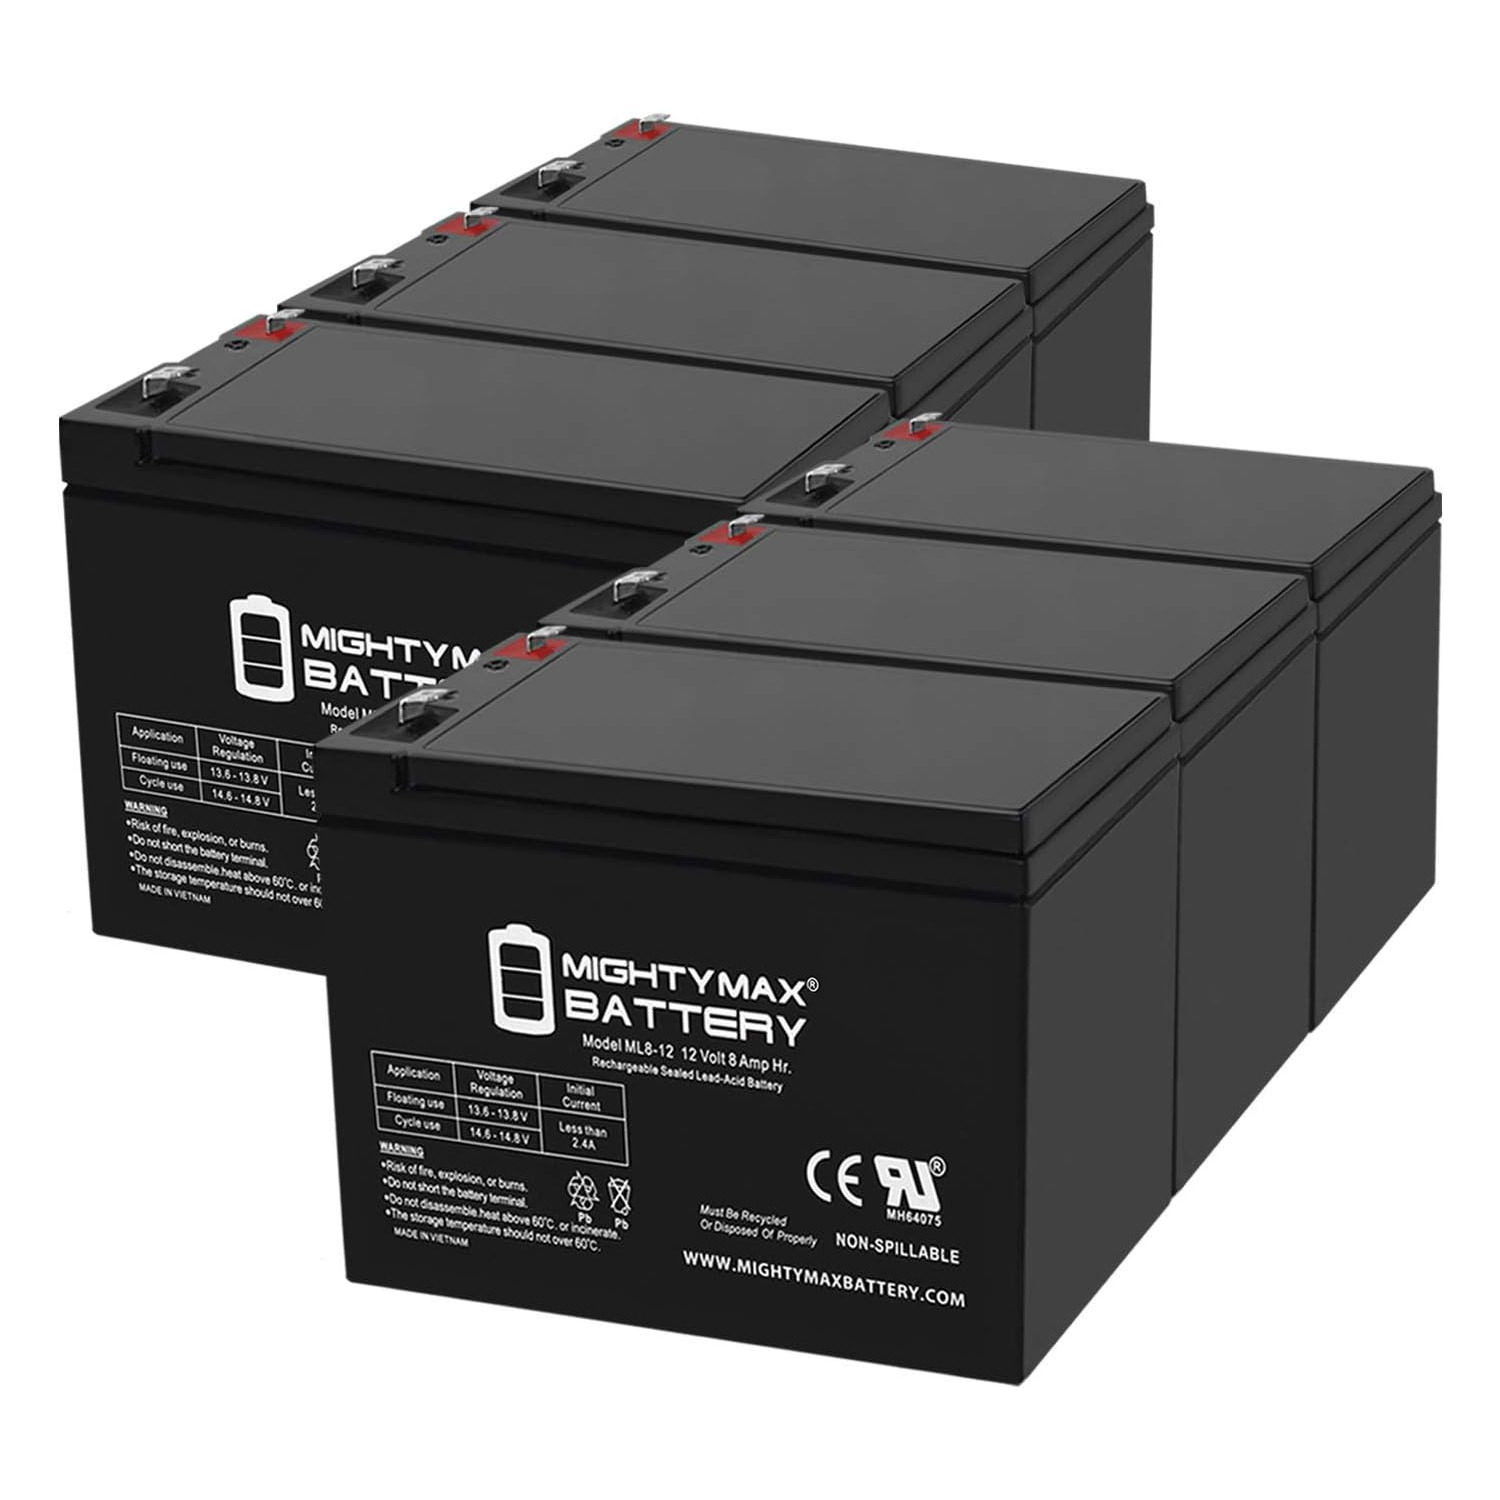 12V 8Ah SLA Replacement Battery compatible with Humminbird 398ci Combo Fishfinder - 6 Pack